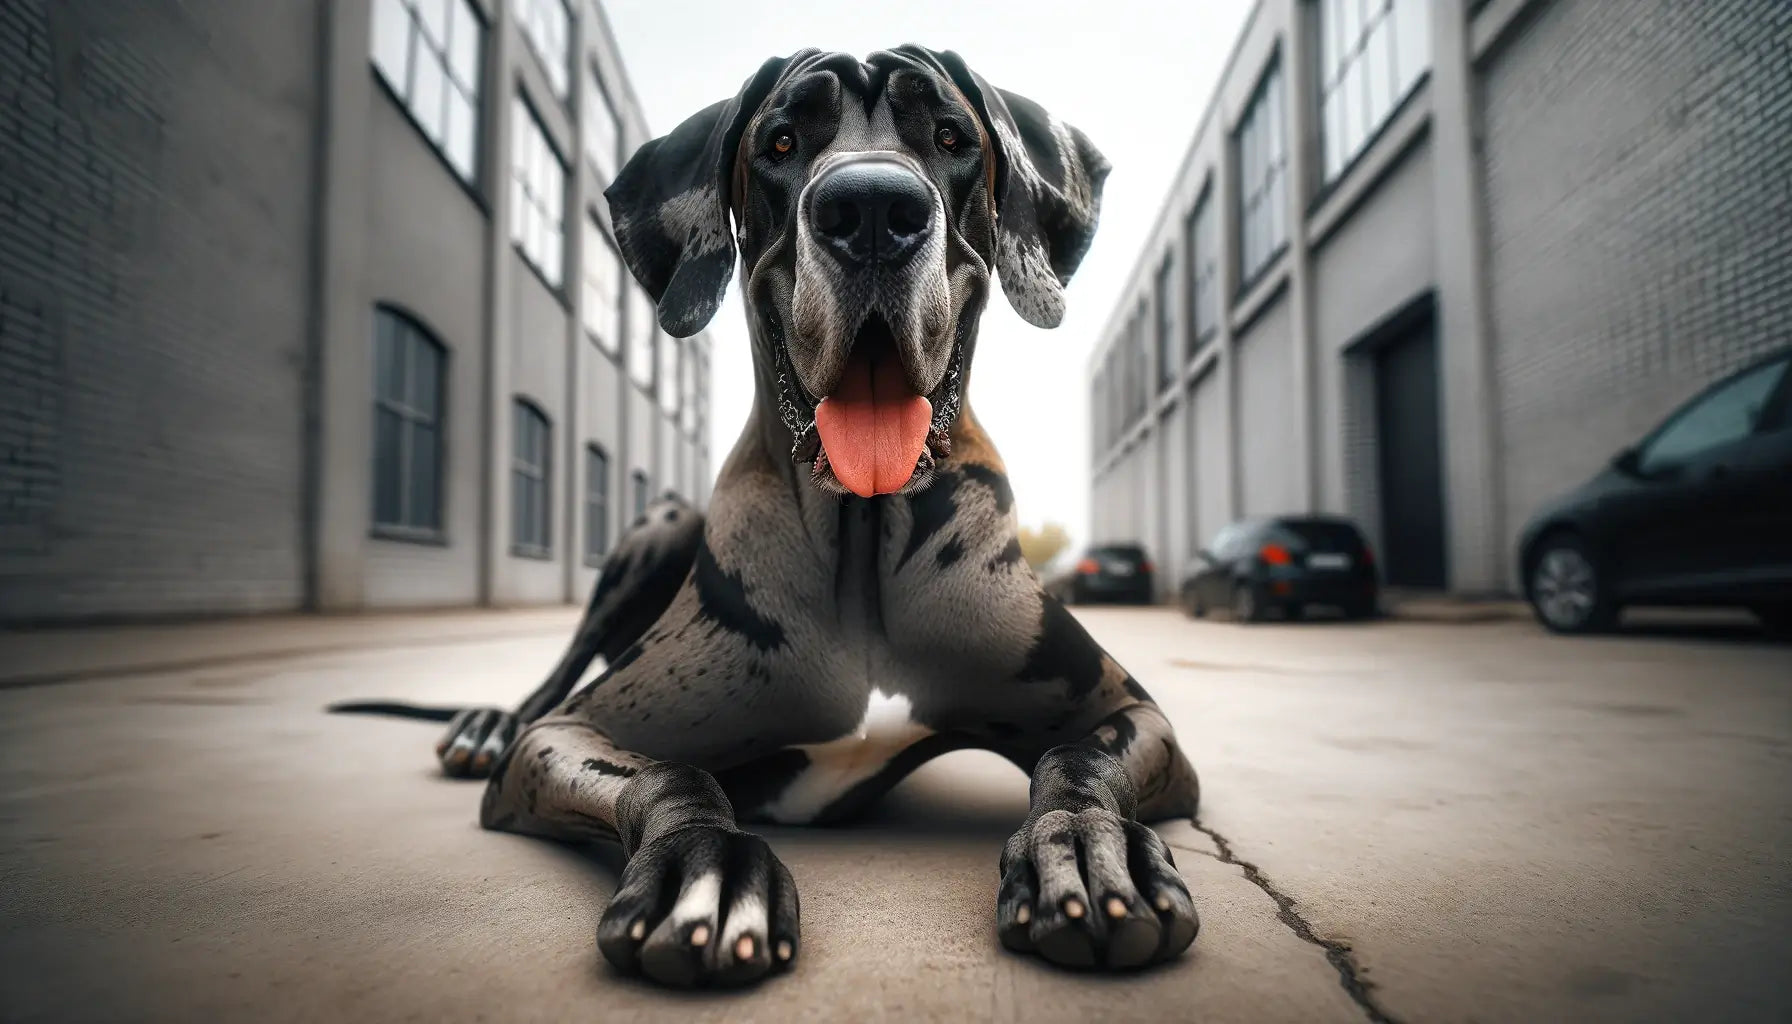 Brindle Great Dane on concrete pavement, a tongue-out smile displaying its playful attitude.